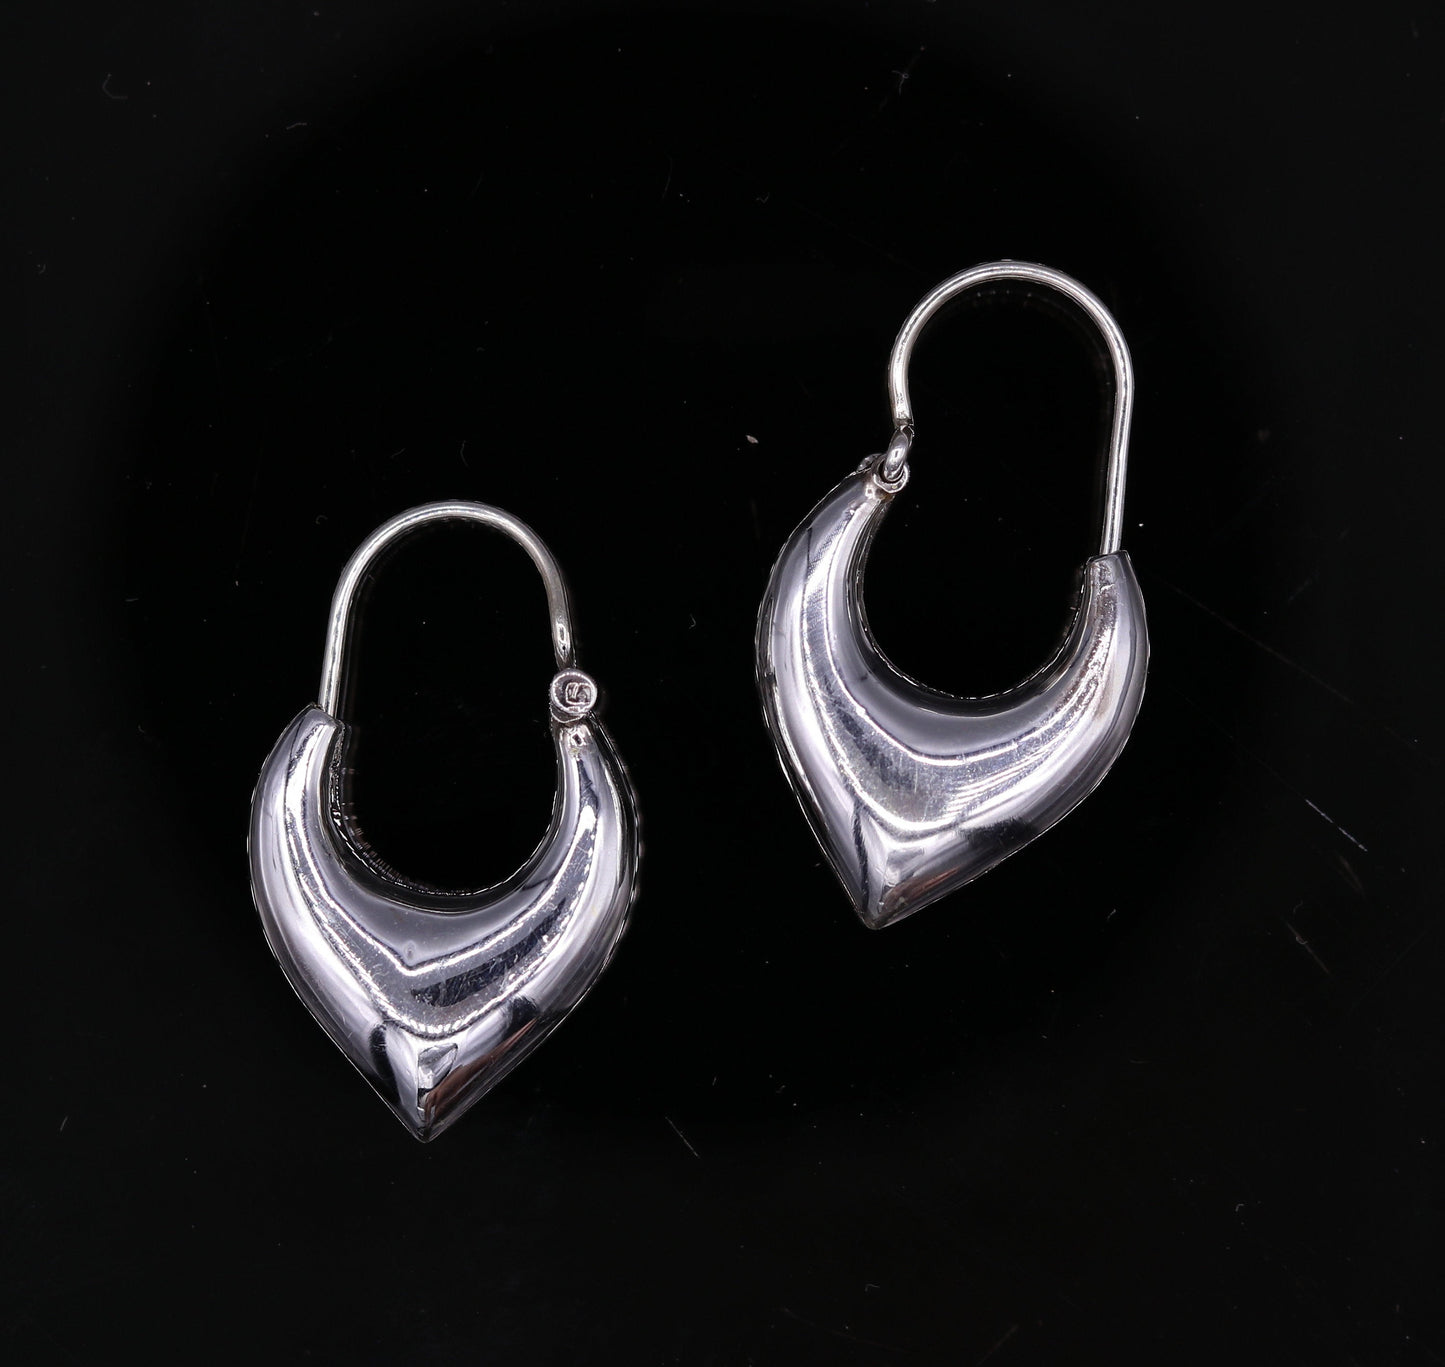 925 sterling pure silver handmade vintage customized design fabulous unisex hoops earrings kundal, ethnic bali tribal jewelry india s585 - TRIBAL ORNAMENTS